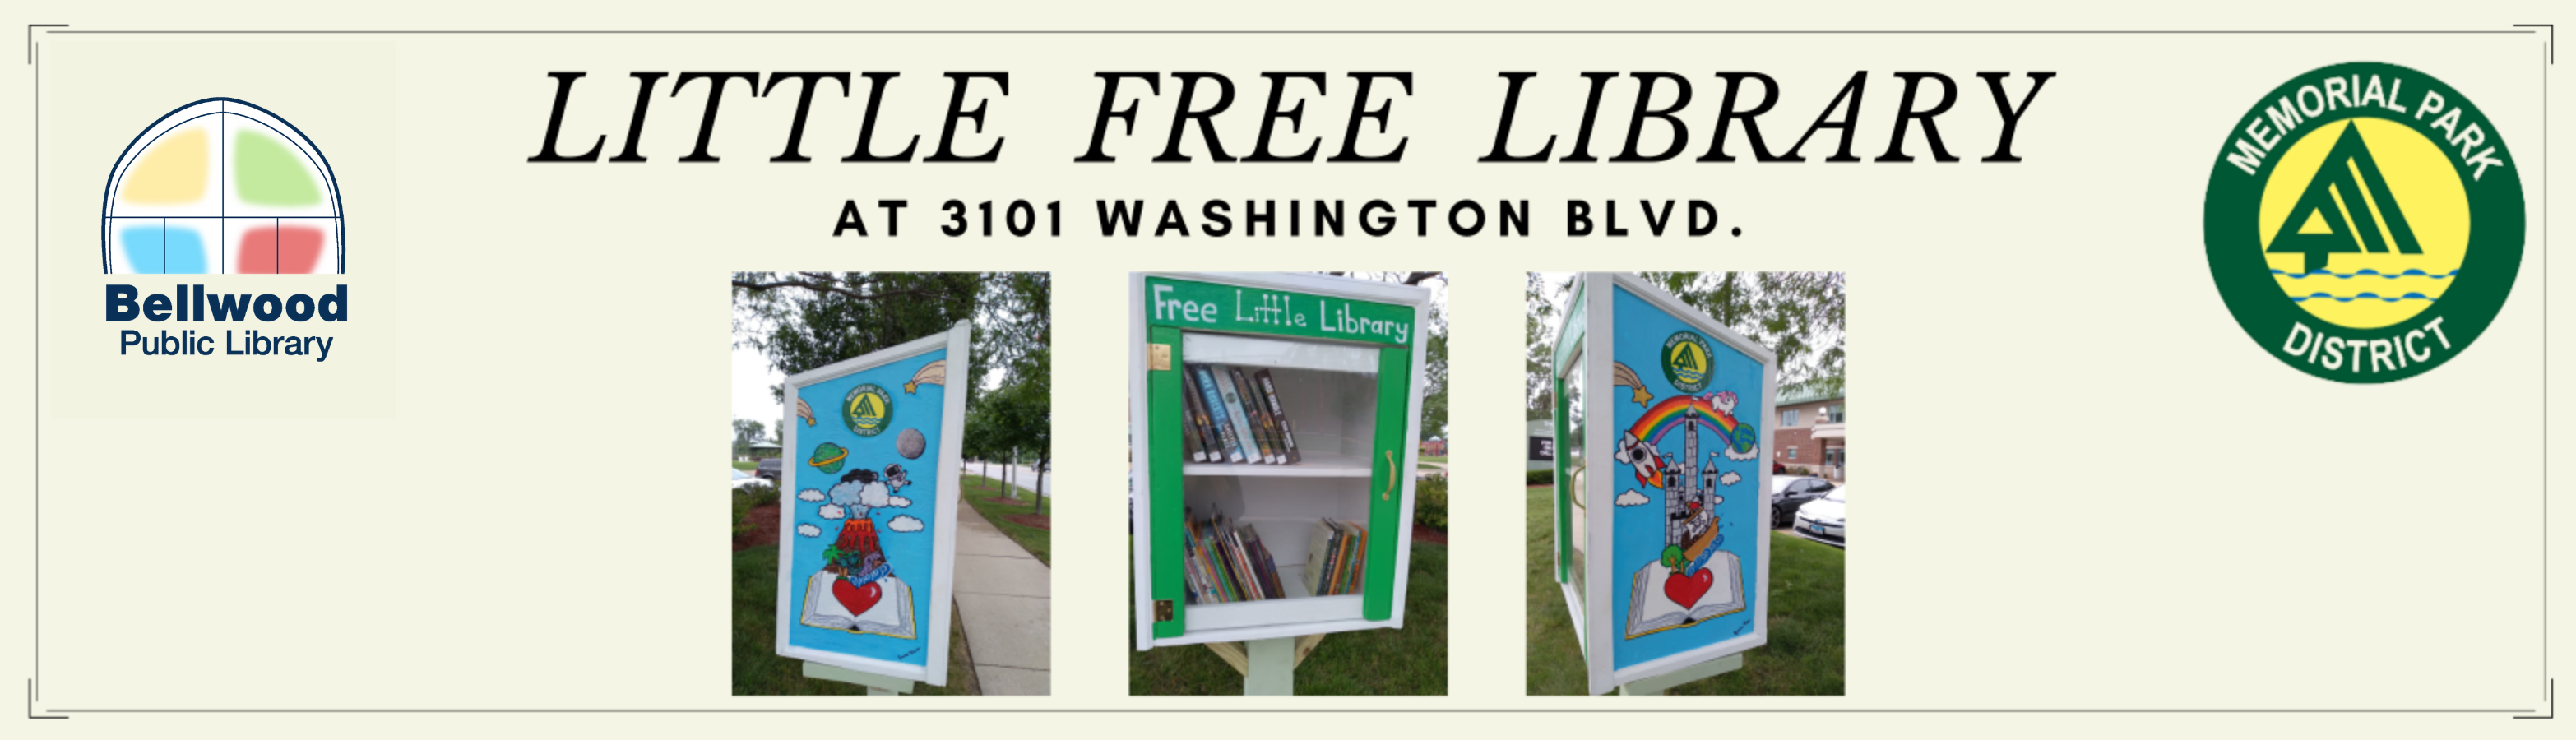 three images ofthe little free library near the fitness center, a small white wooden box on a stilt, and the text Little Free Library at 3101 Washington Boulevard